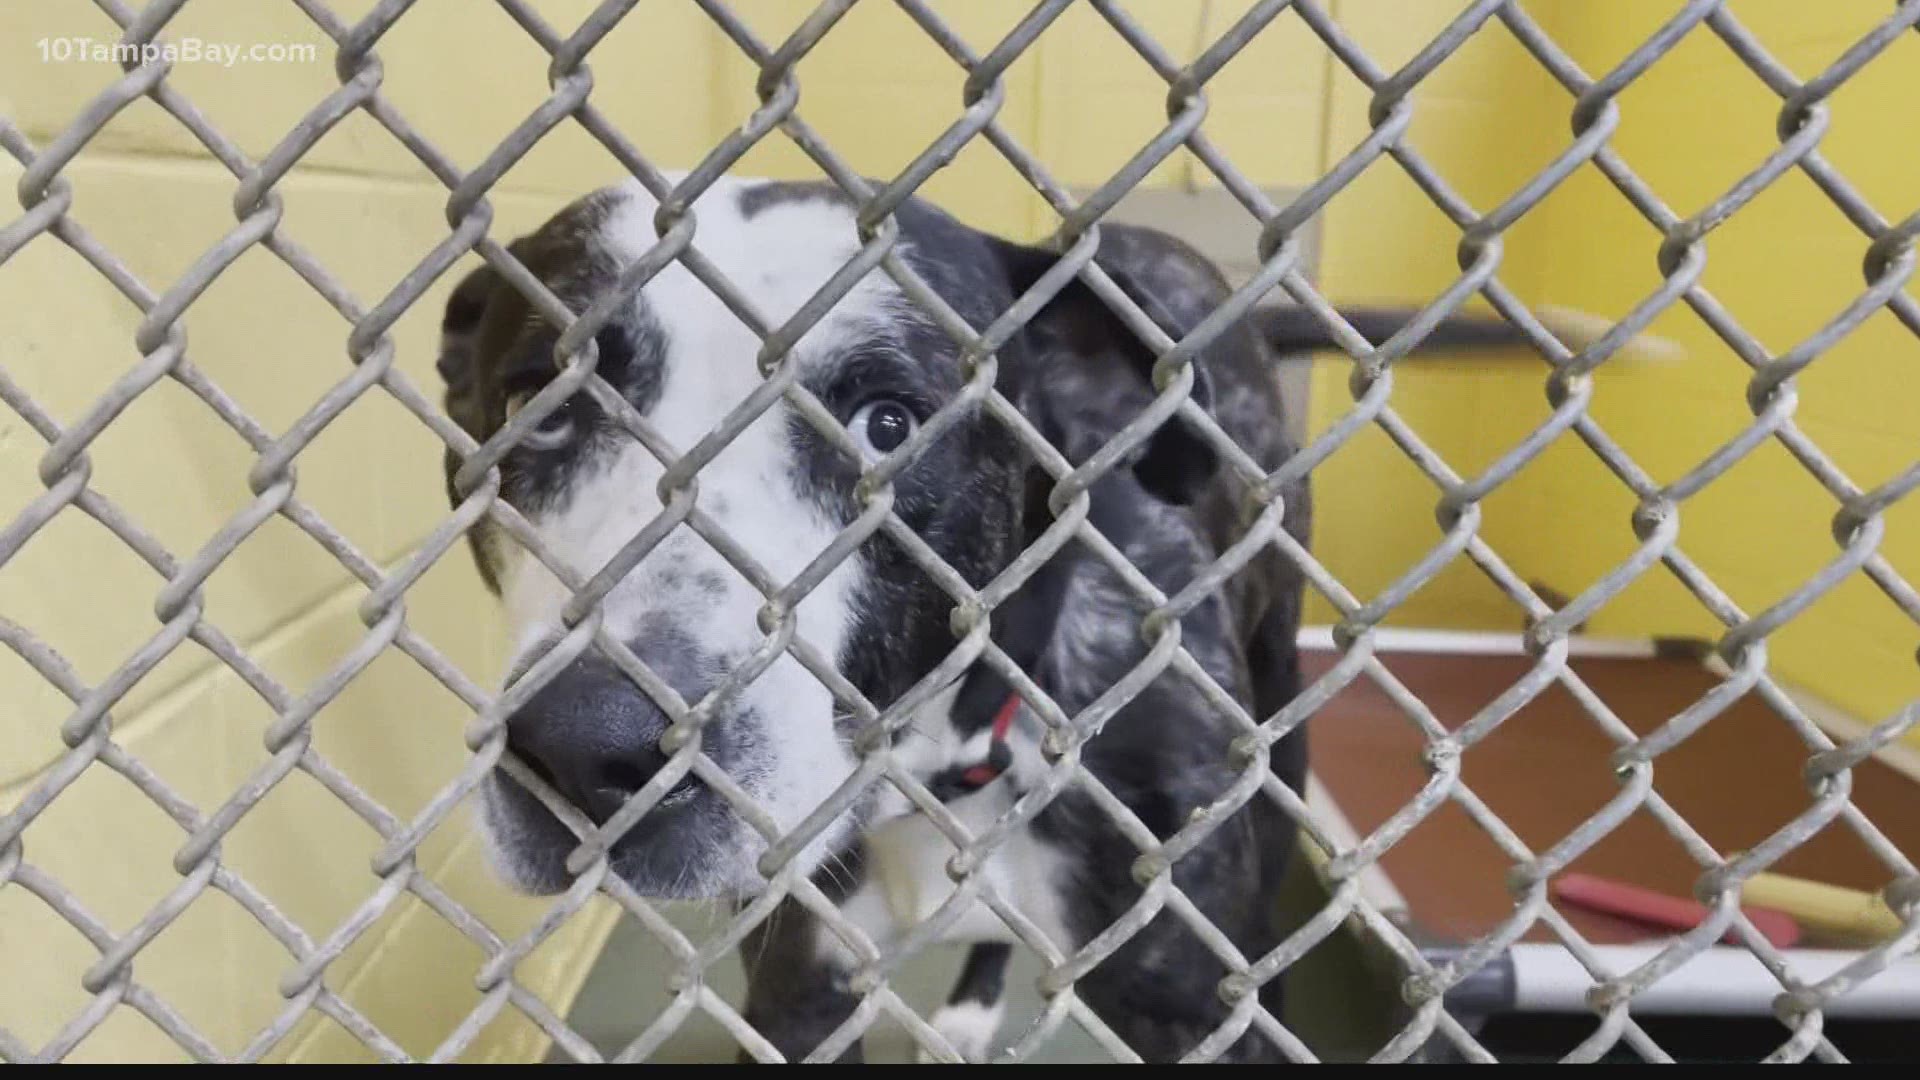 The agency has seen a drastic increase in surrendered and abandoned pets since October.